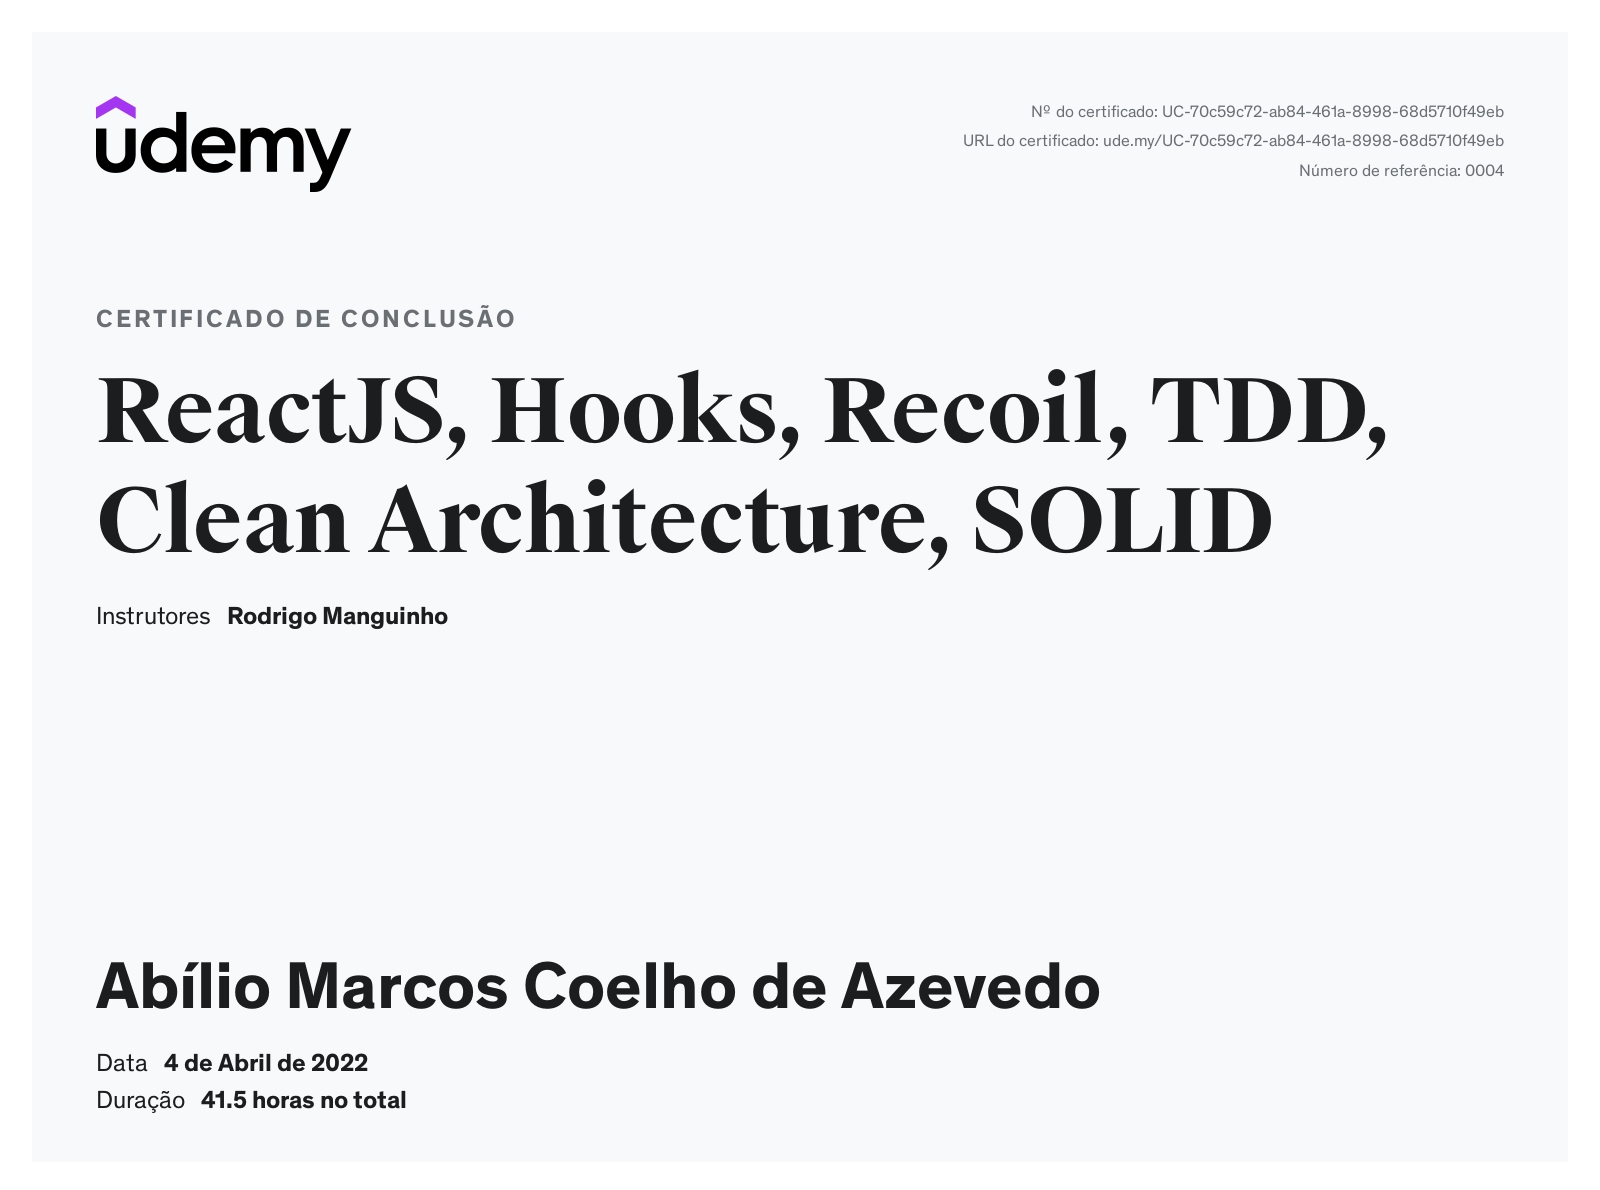 Curso ReactJS, Hooks, Recoil, TDD, Clean Architecture, SOLID